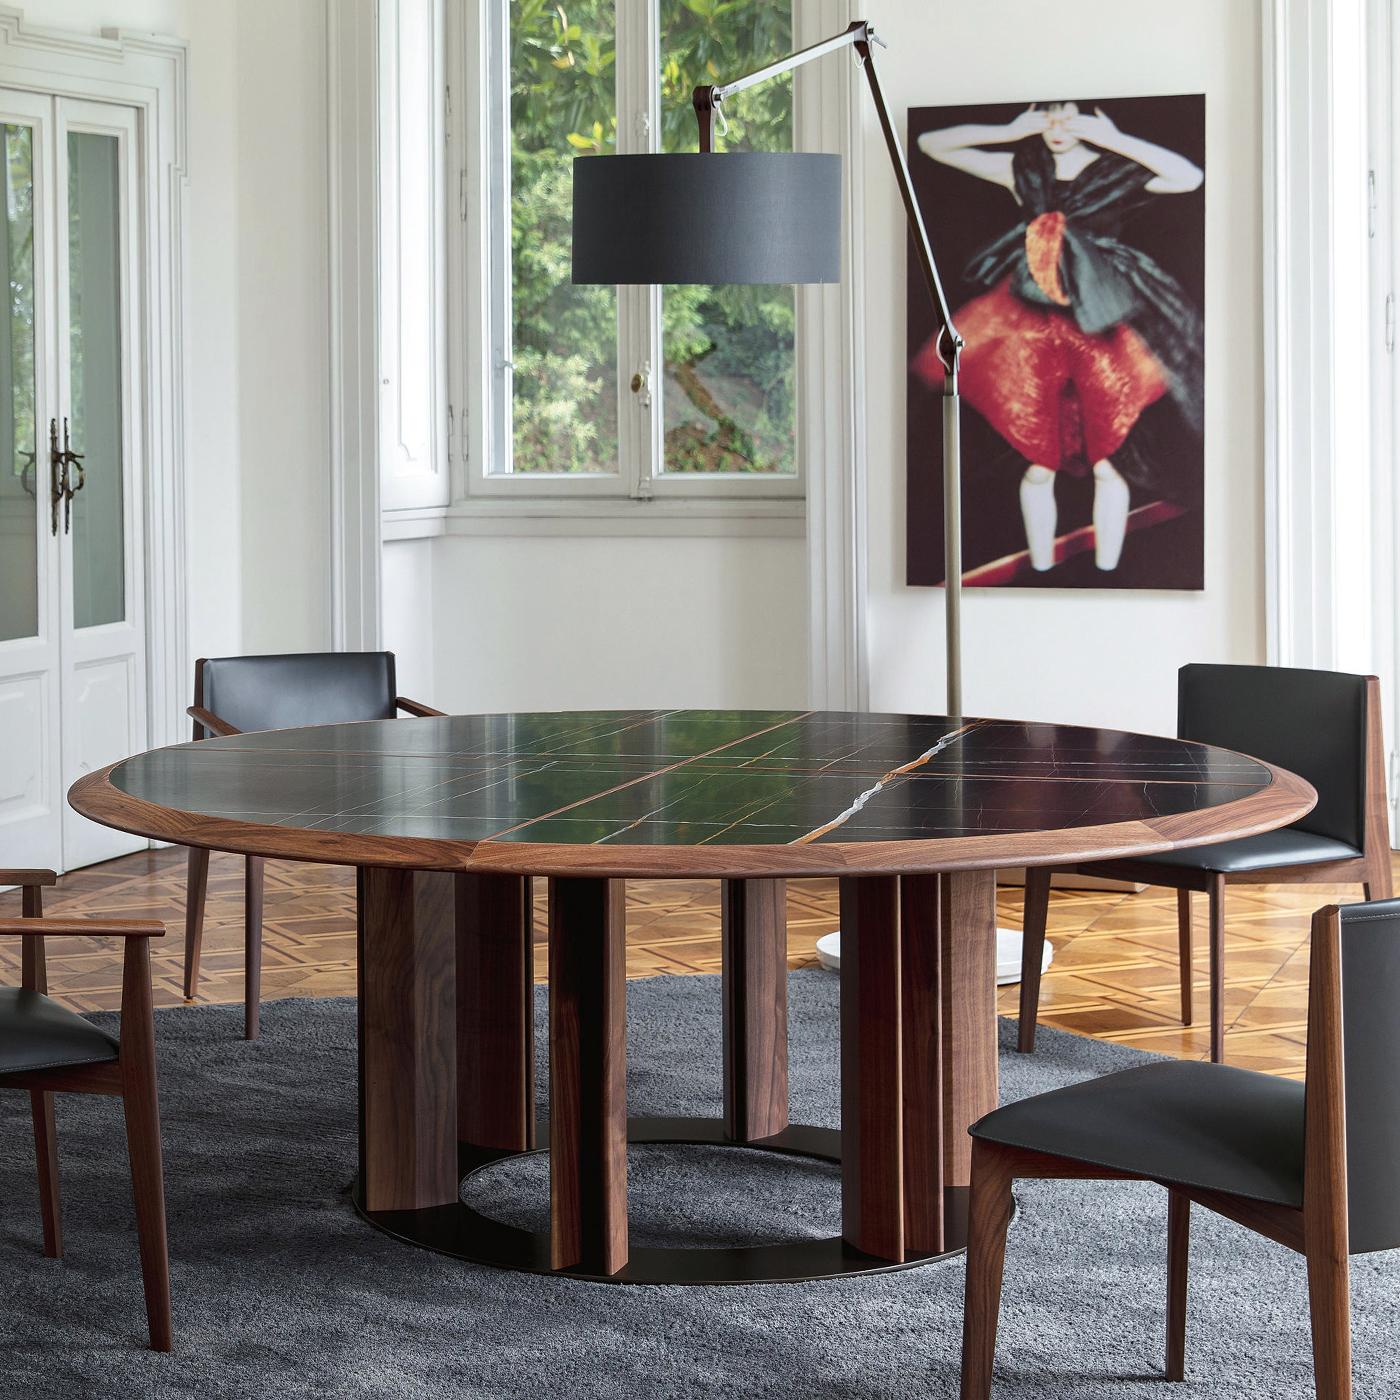 Steel Crosby Round Dining Table For Sale